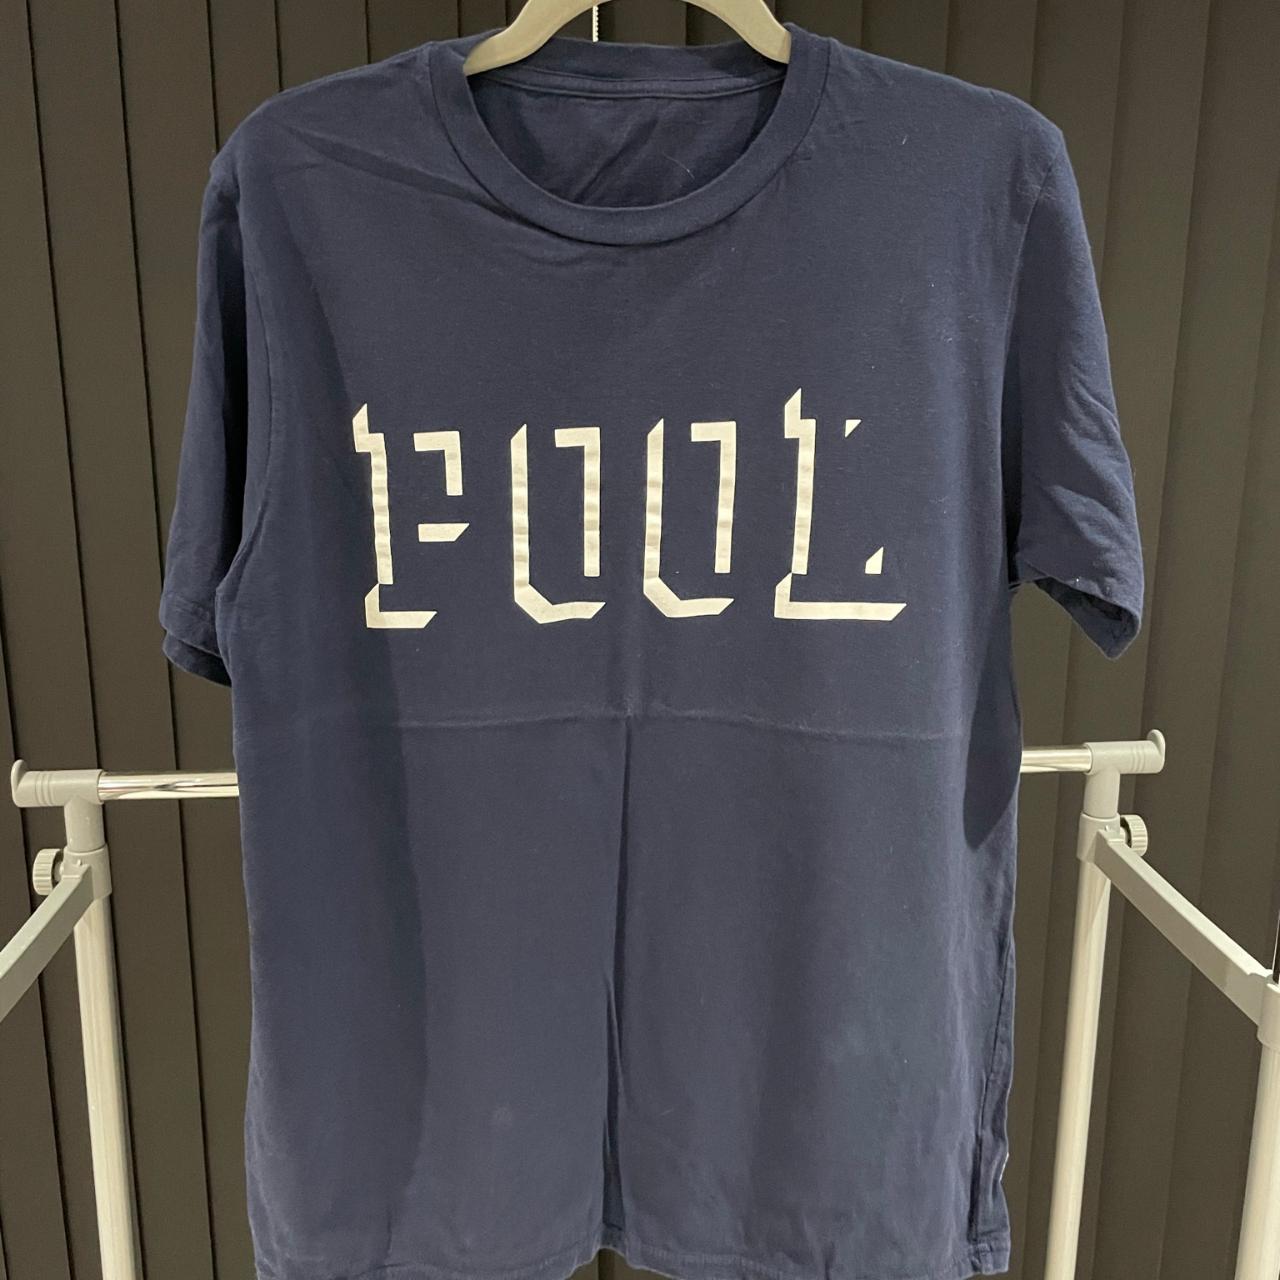 • 'the POOL' Aoyama by Fragment Design - T Shirt...